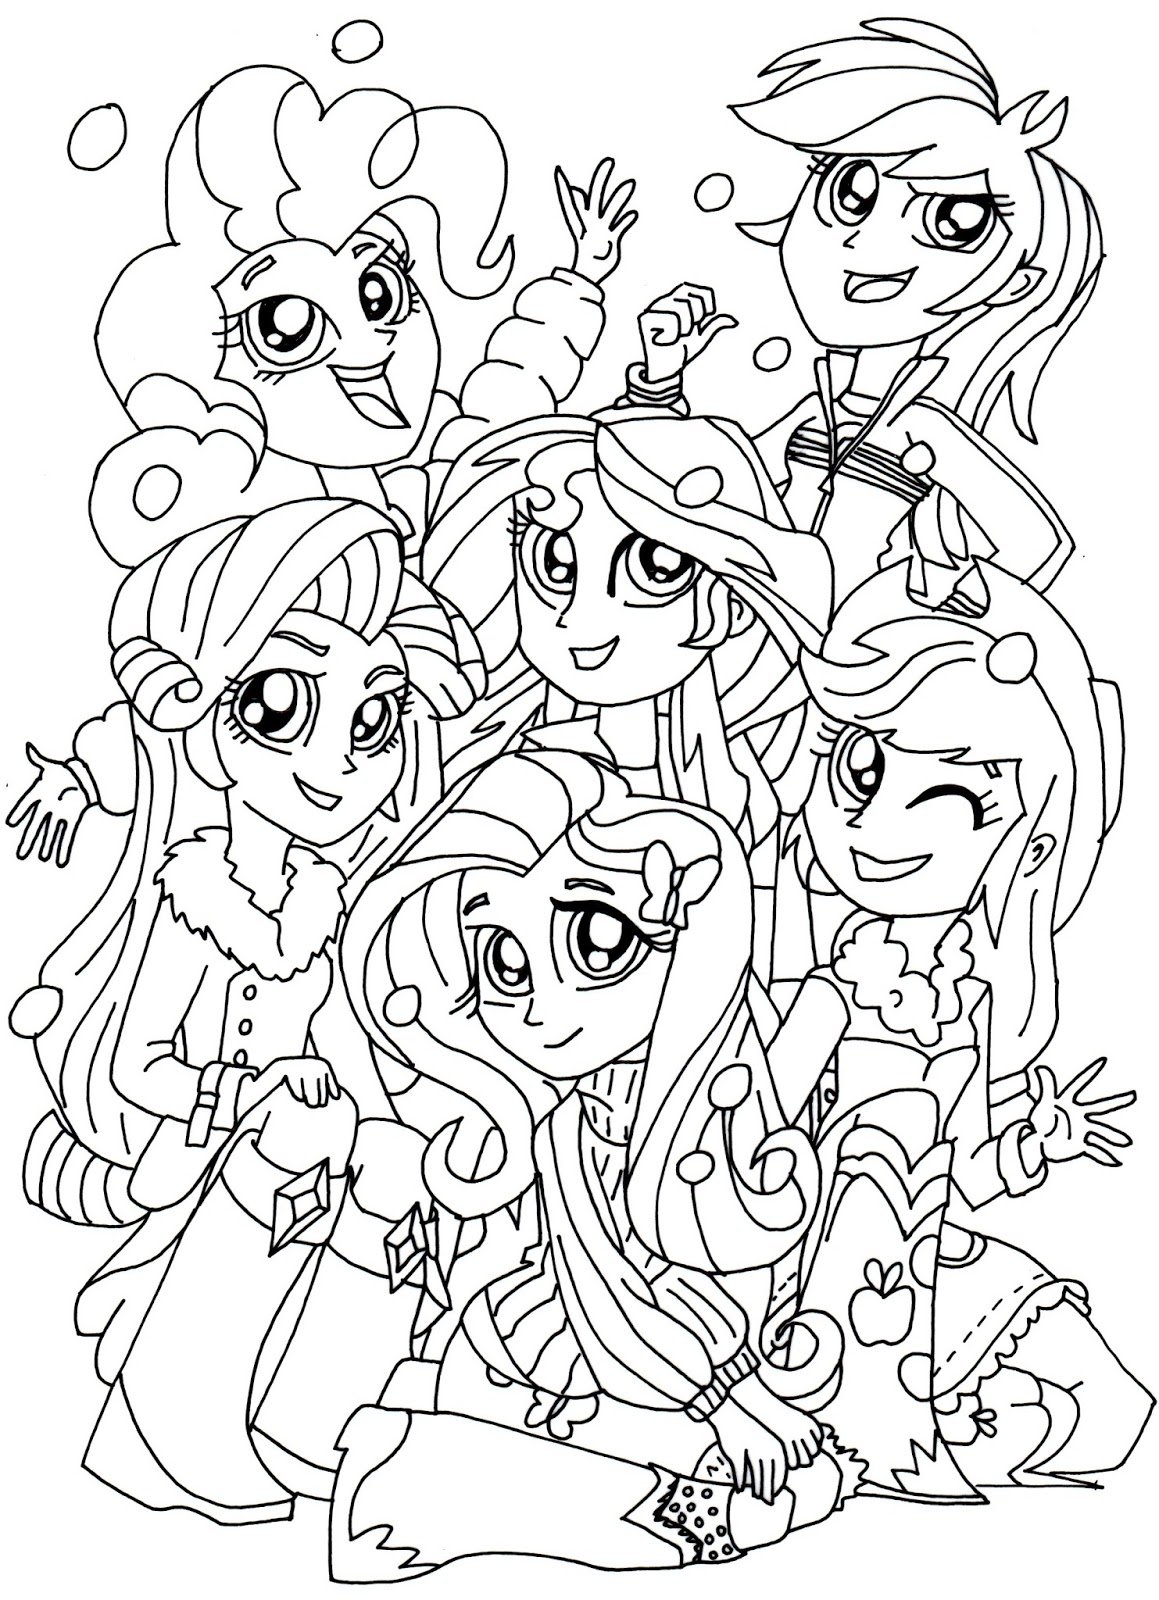 Featured image of post My Little Pony Equestria Girls Coloring Pages Twilight Sparkle - Cat colouring pages activity village.